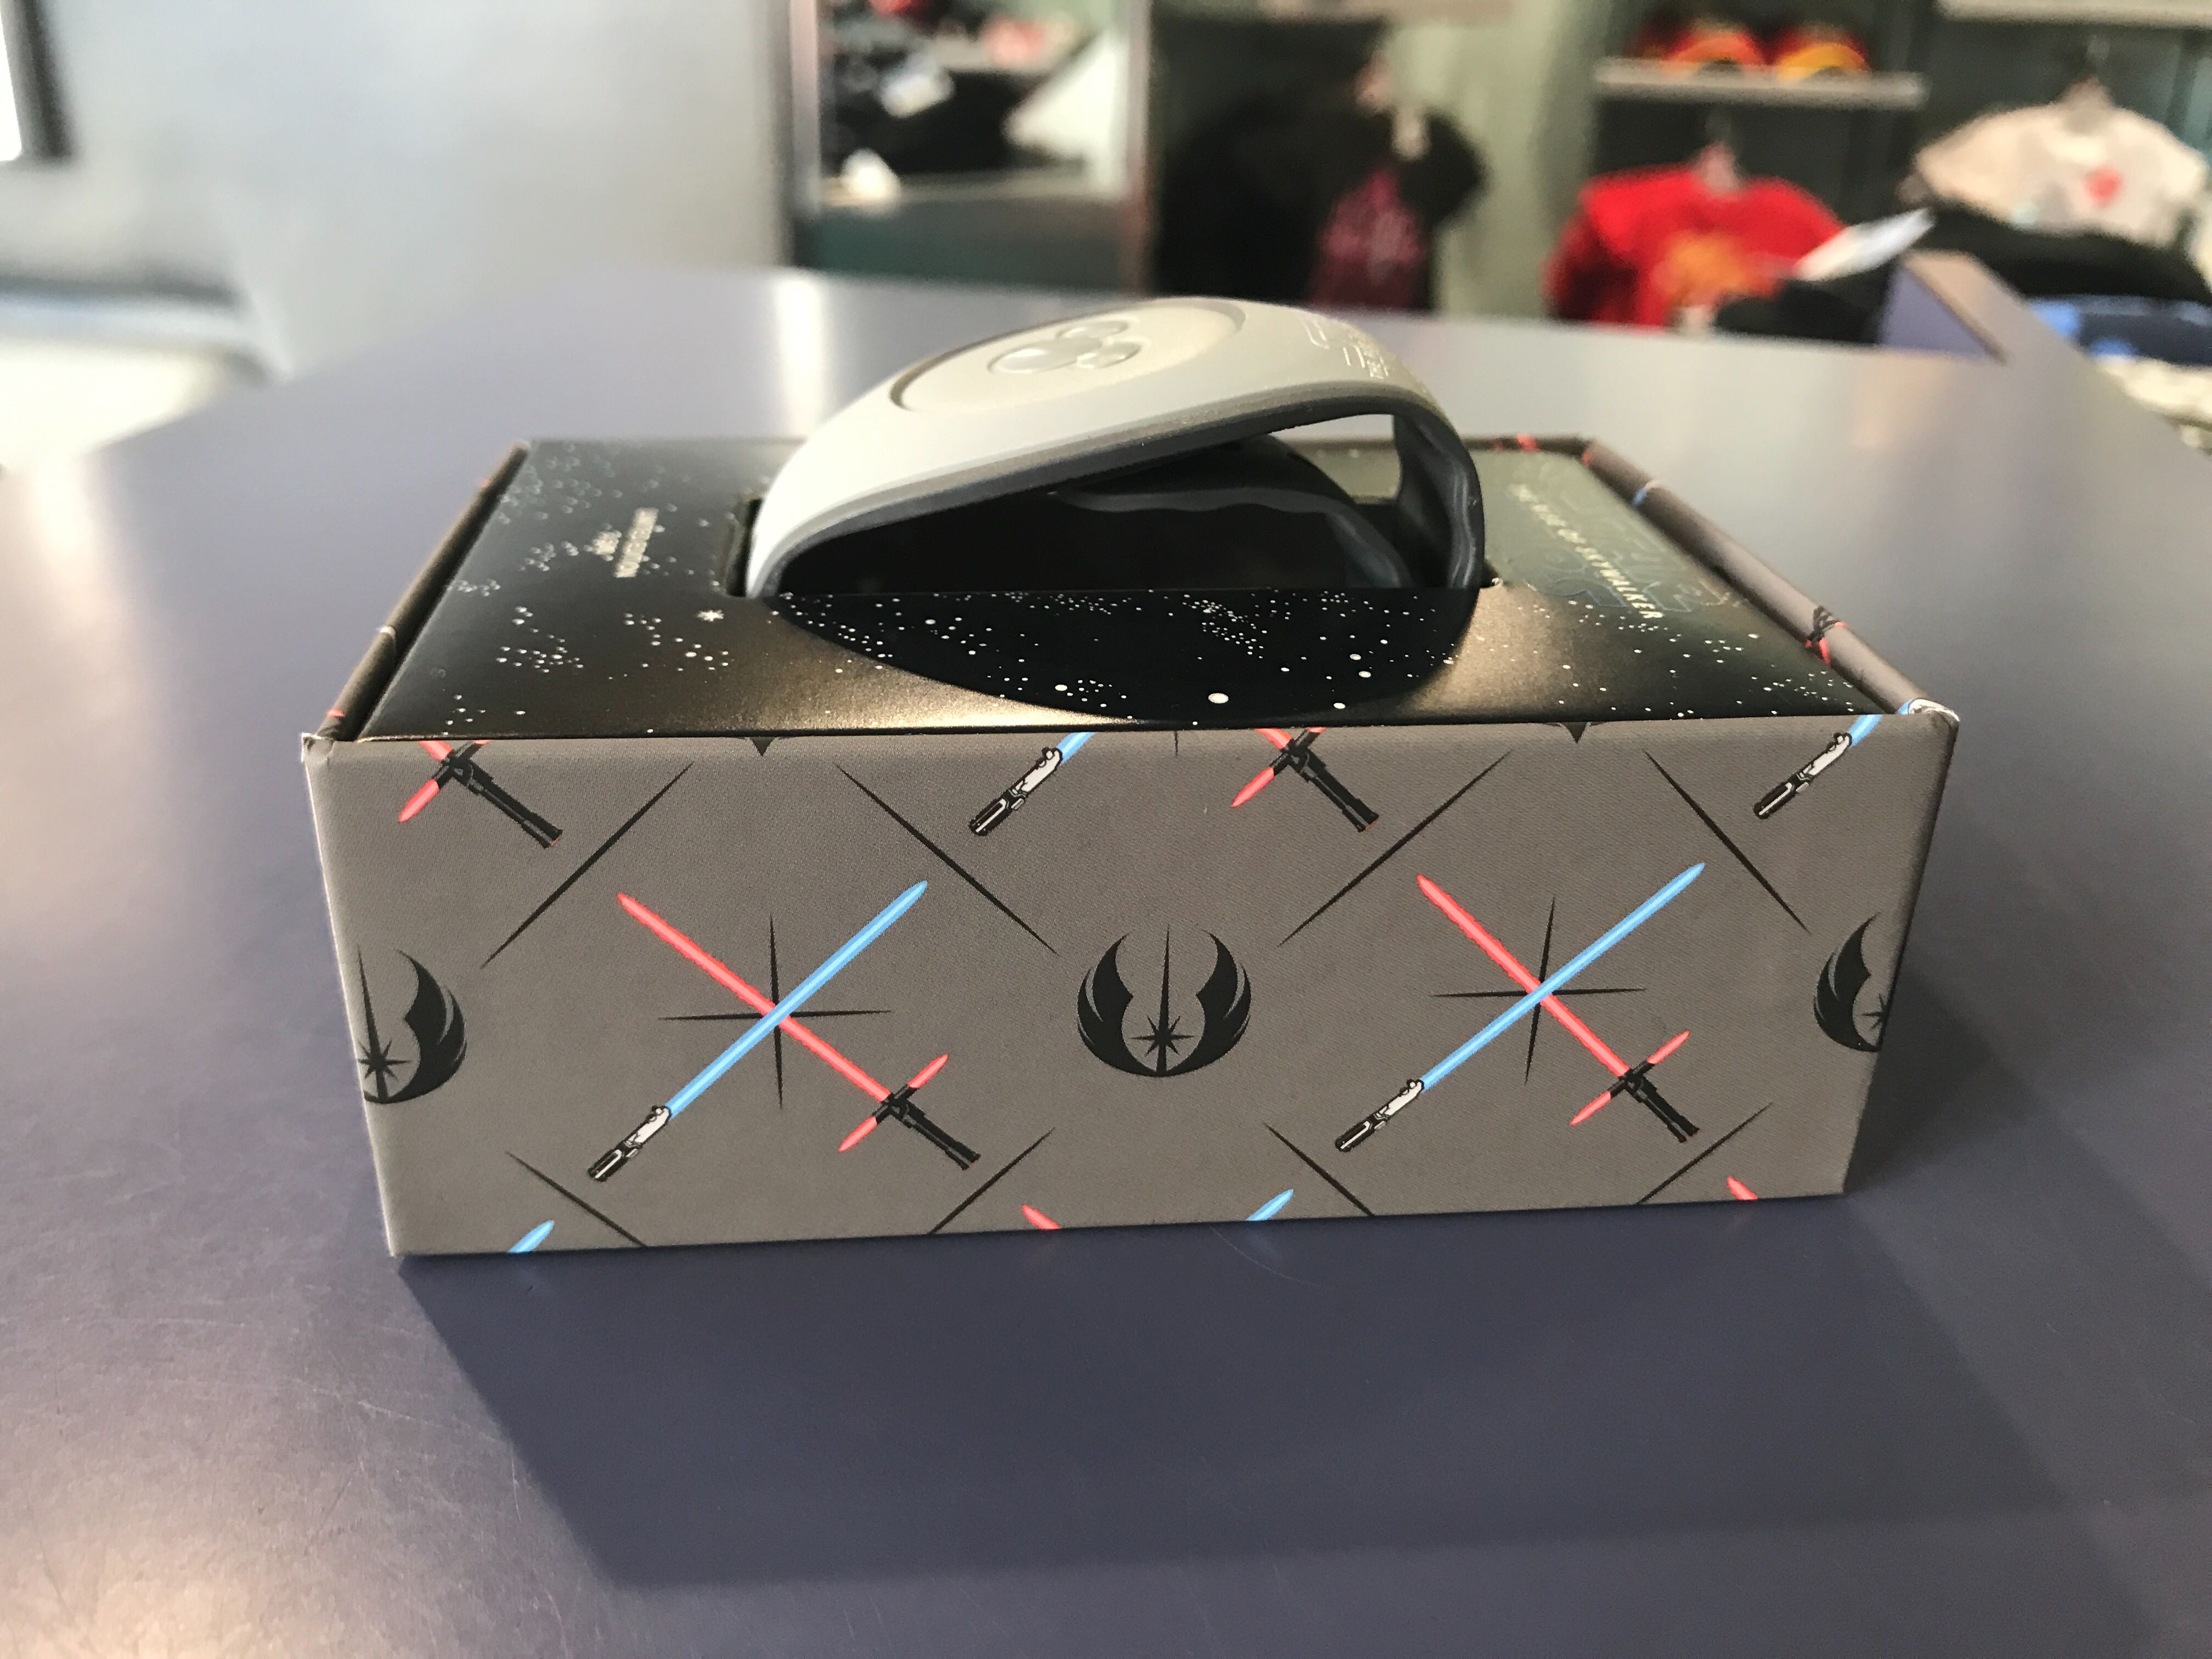 star wars rise of skywalker magicband 10